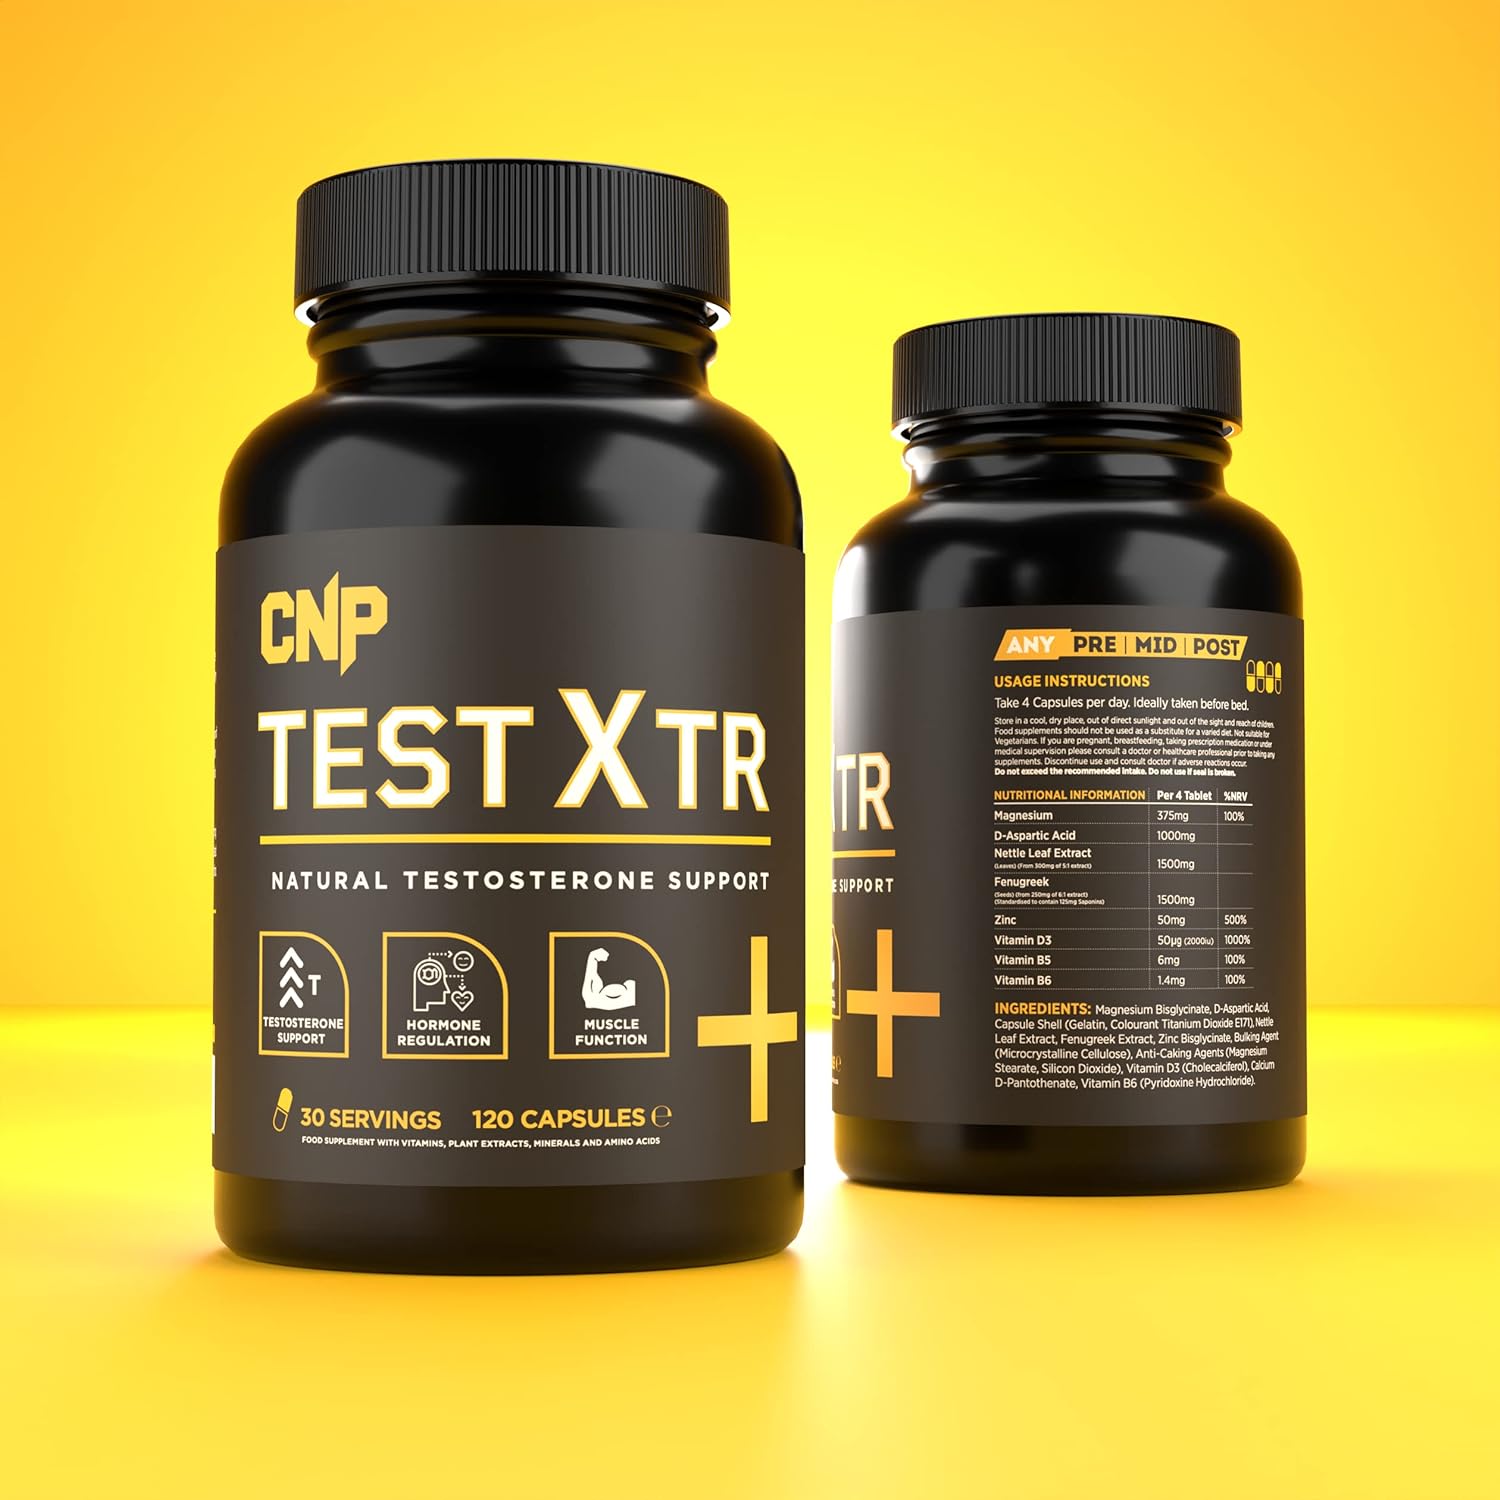 CNP Professional Test XTR with Vitamins, 120 Capsules

